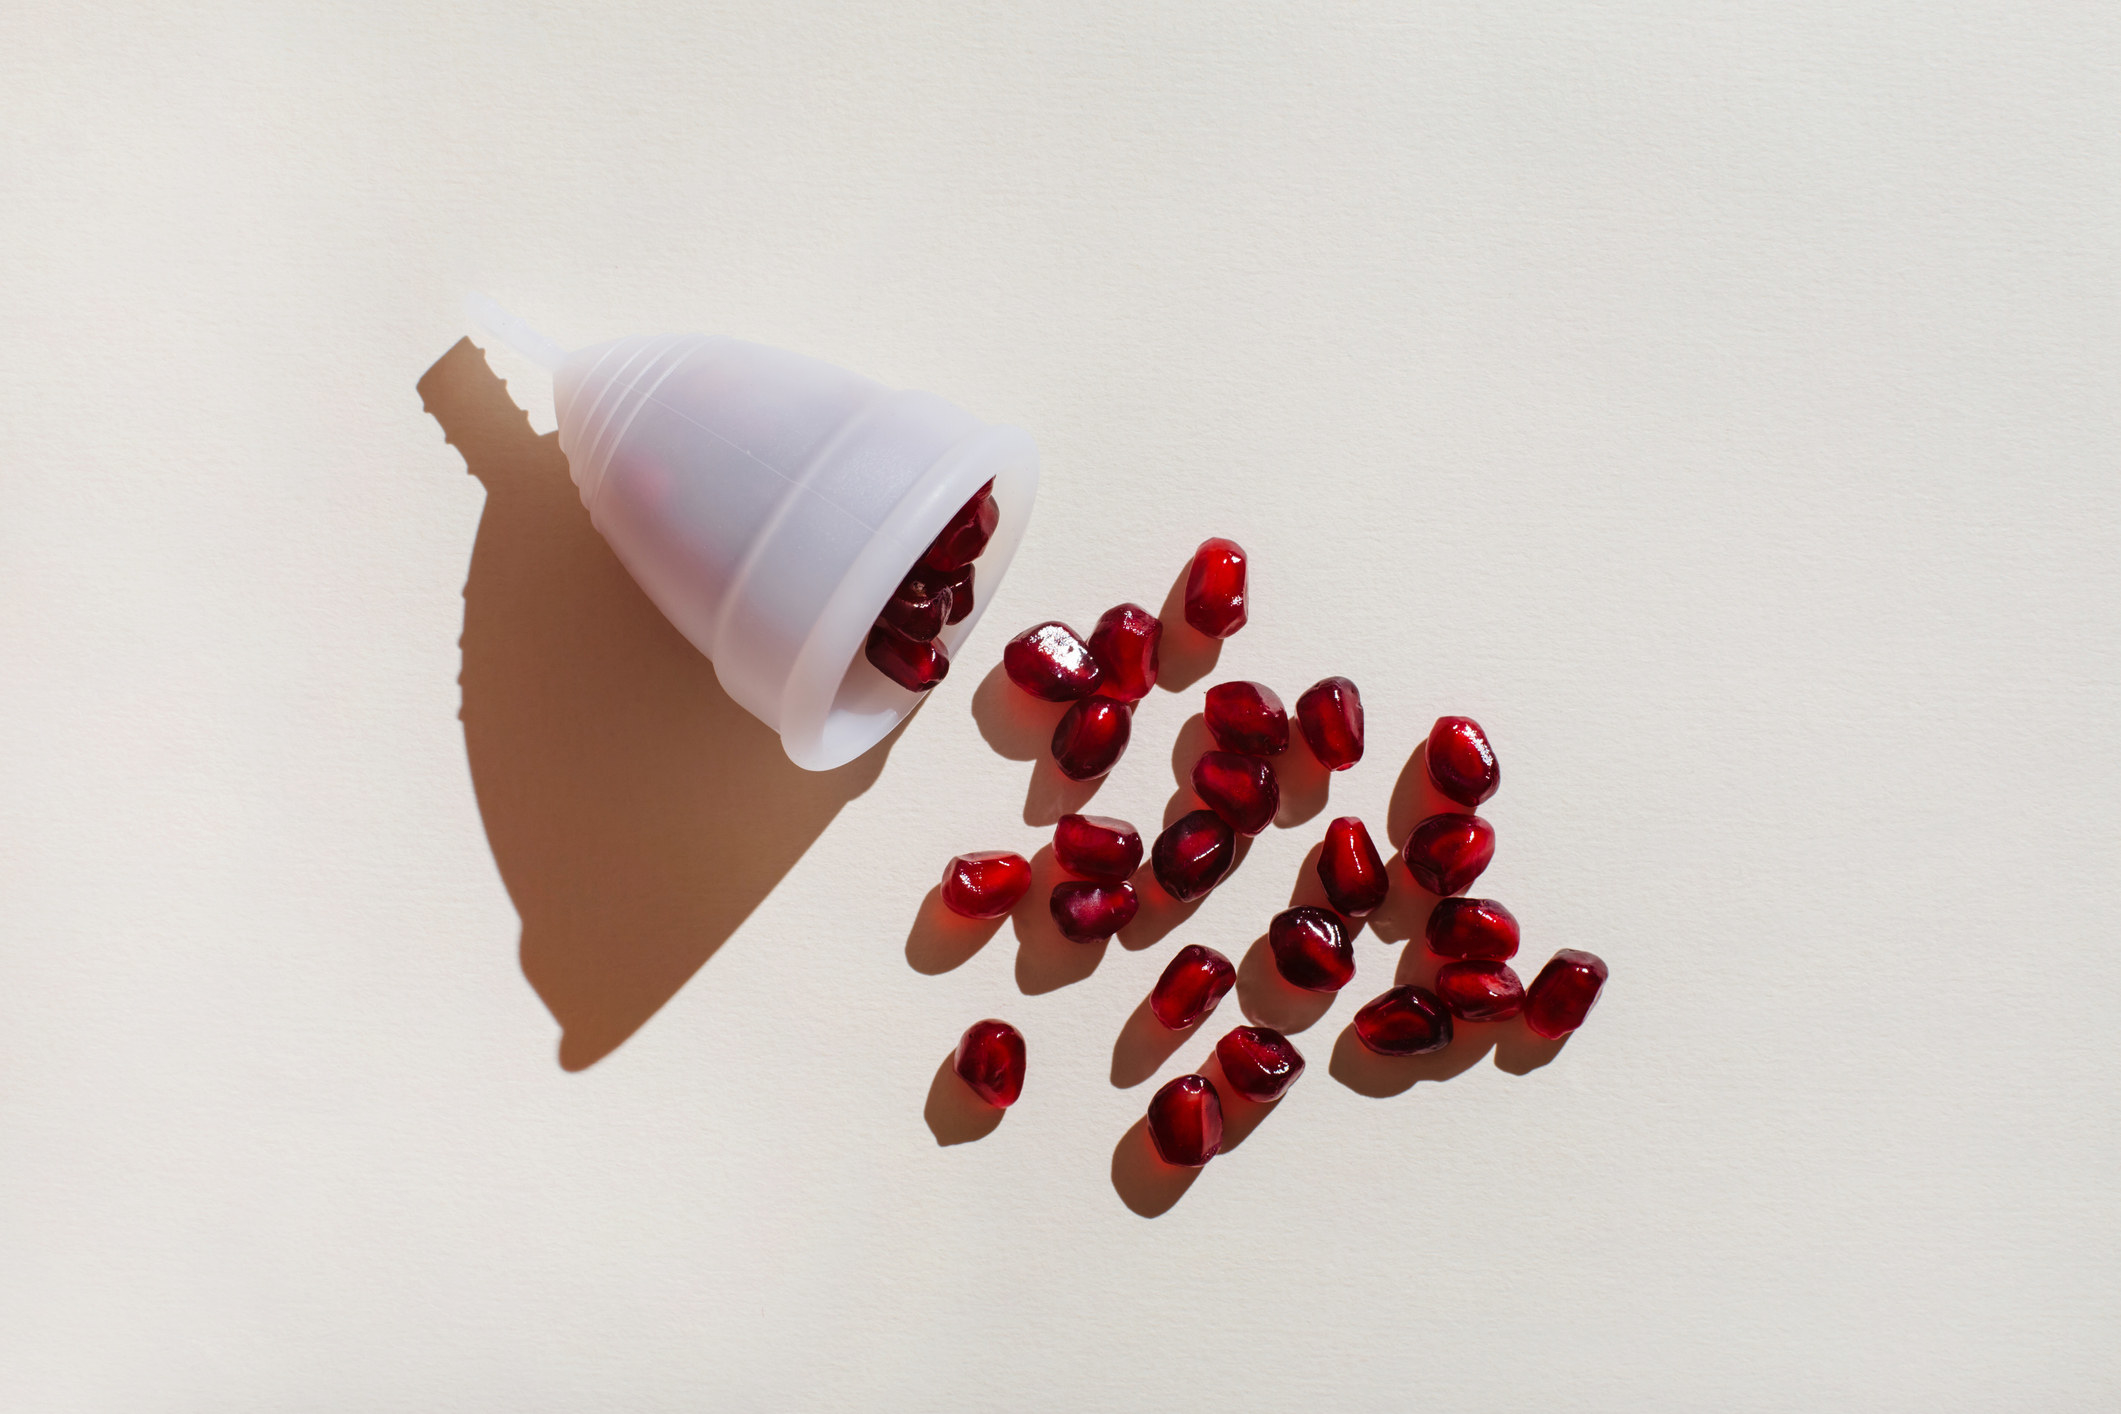 Pomegranate seeds pour out of the menstrual cup